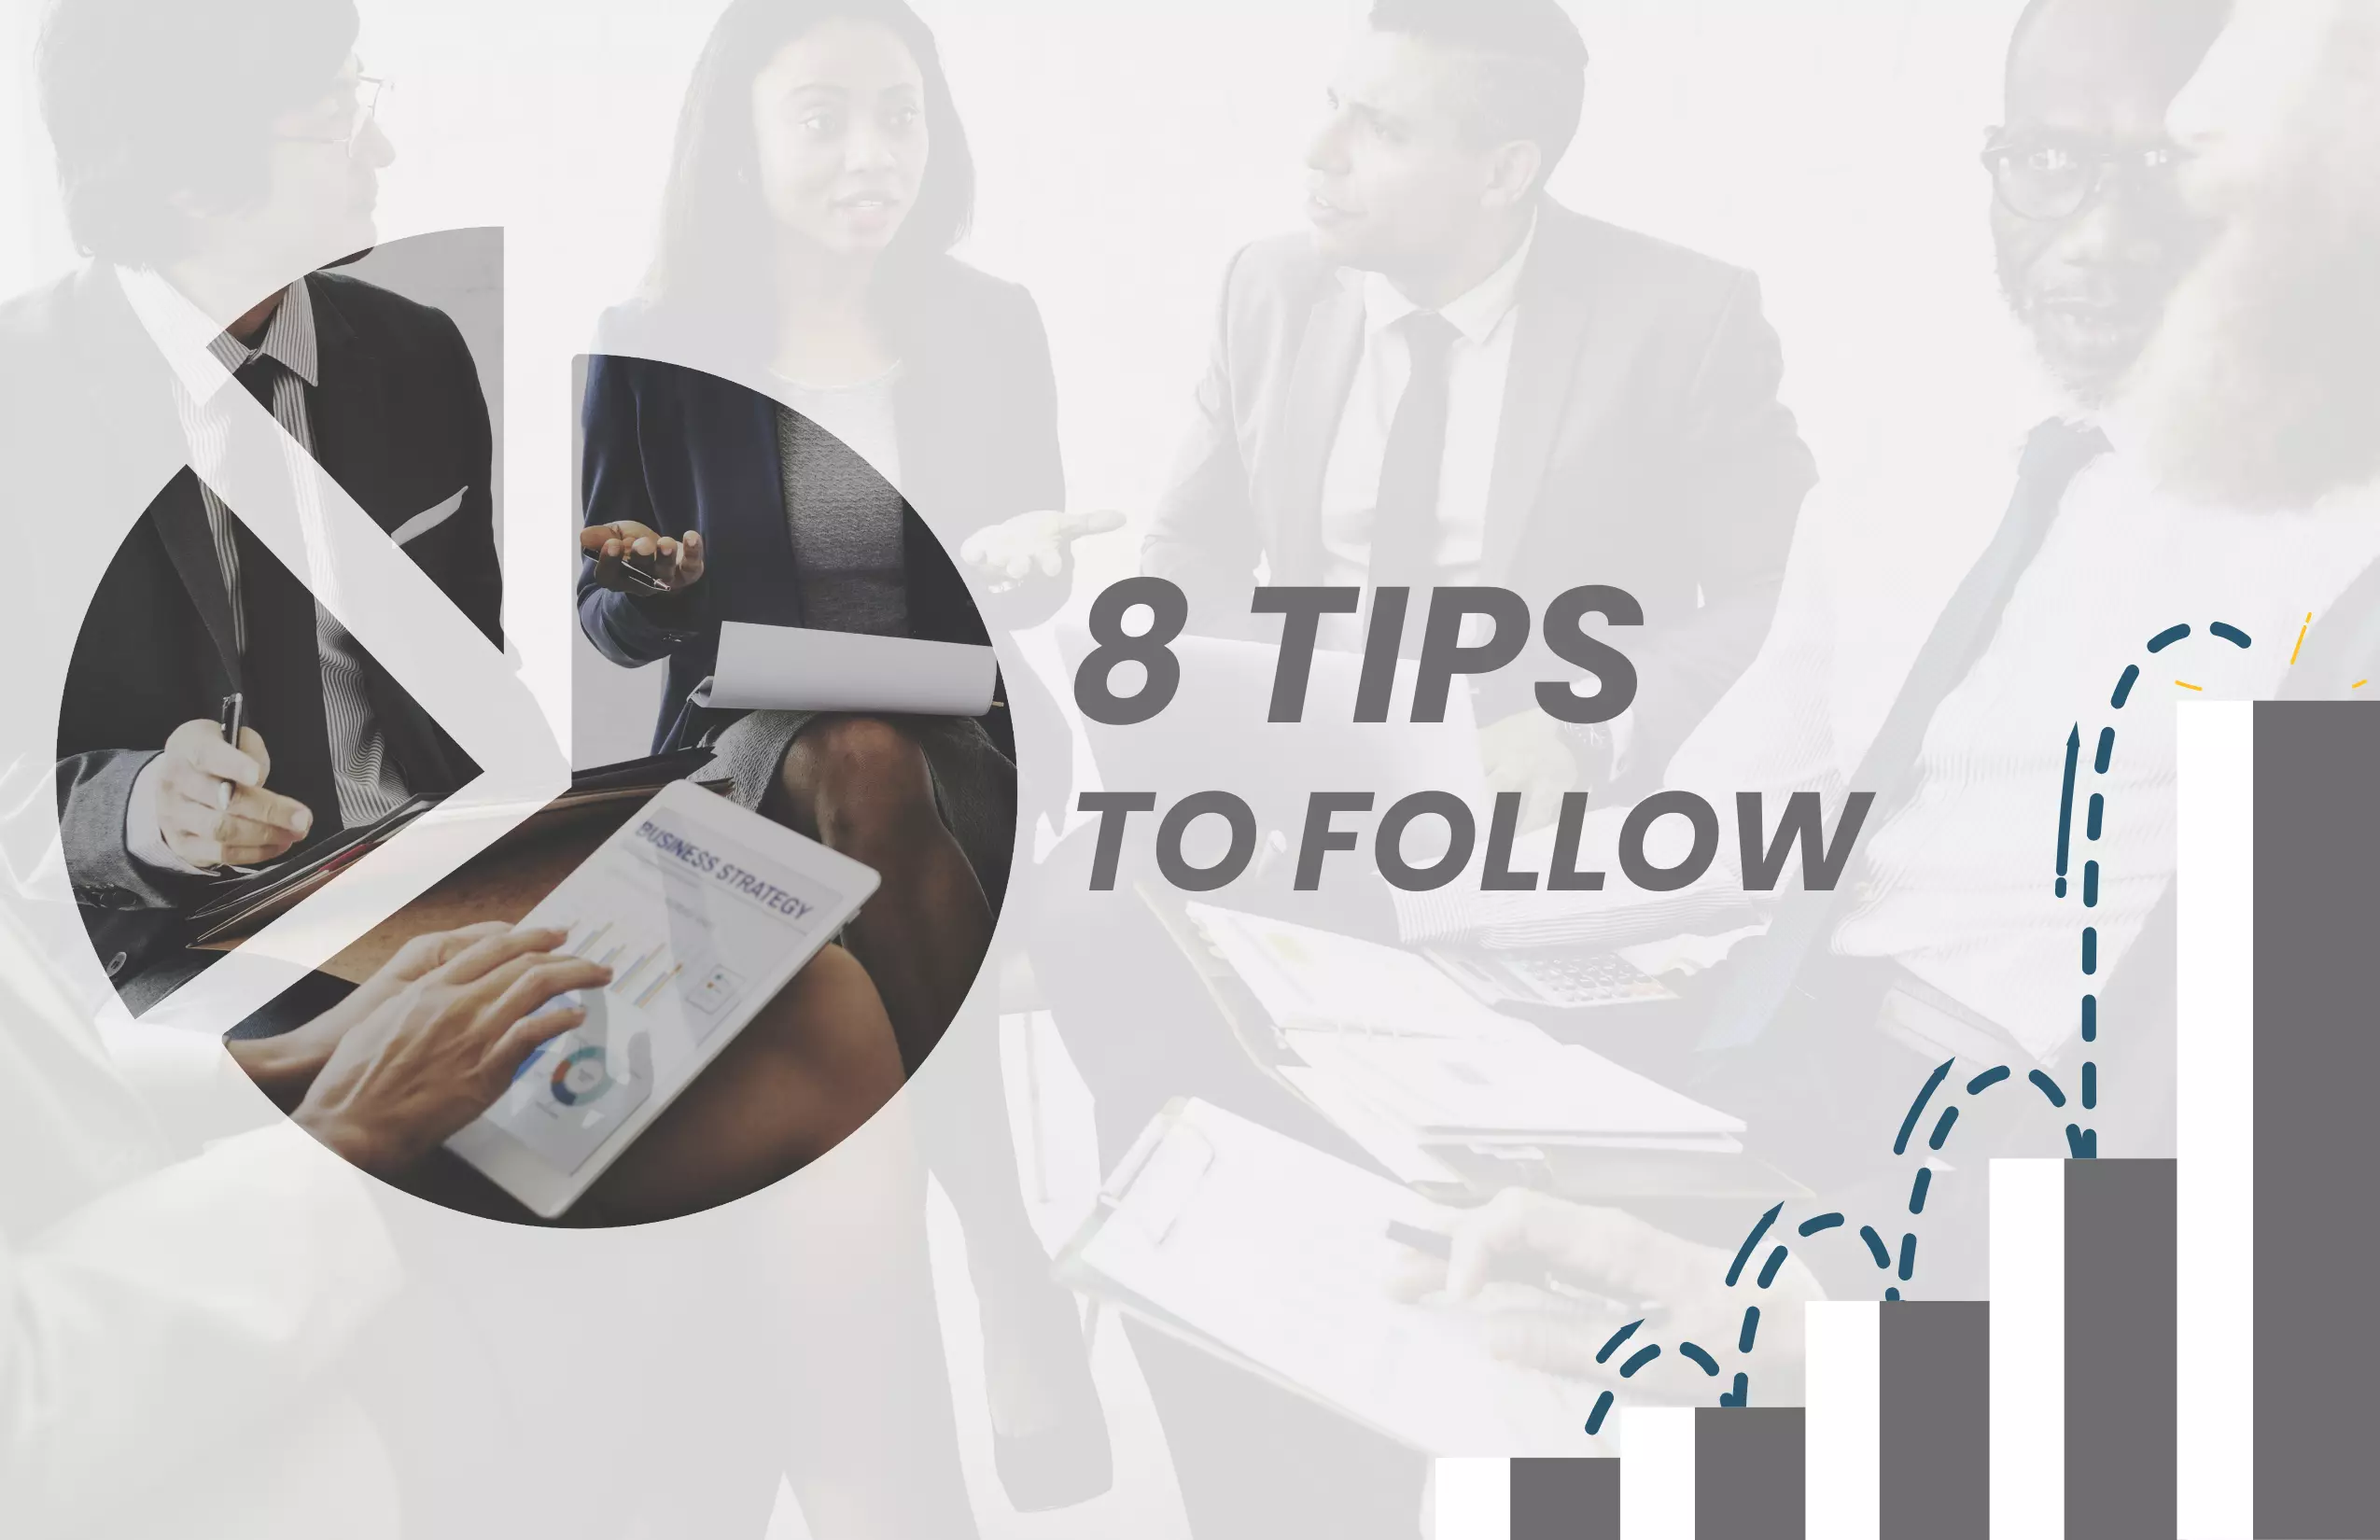 How To Make A Sales Team More Productive: 8 Tips To Follow